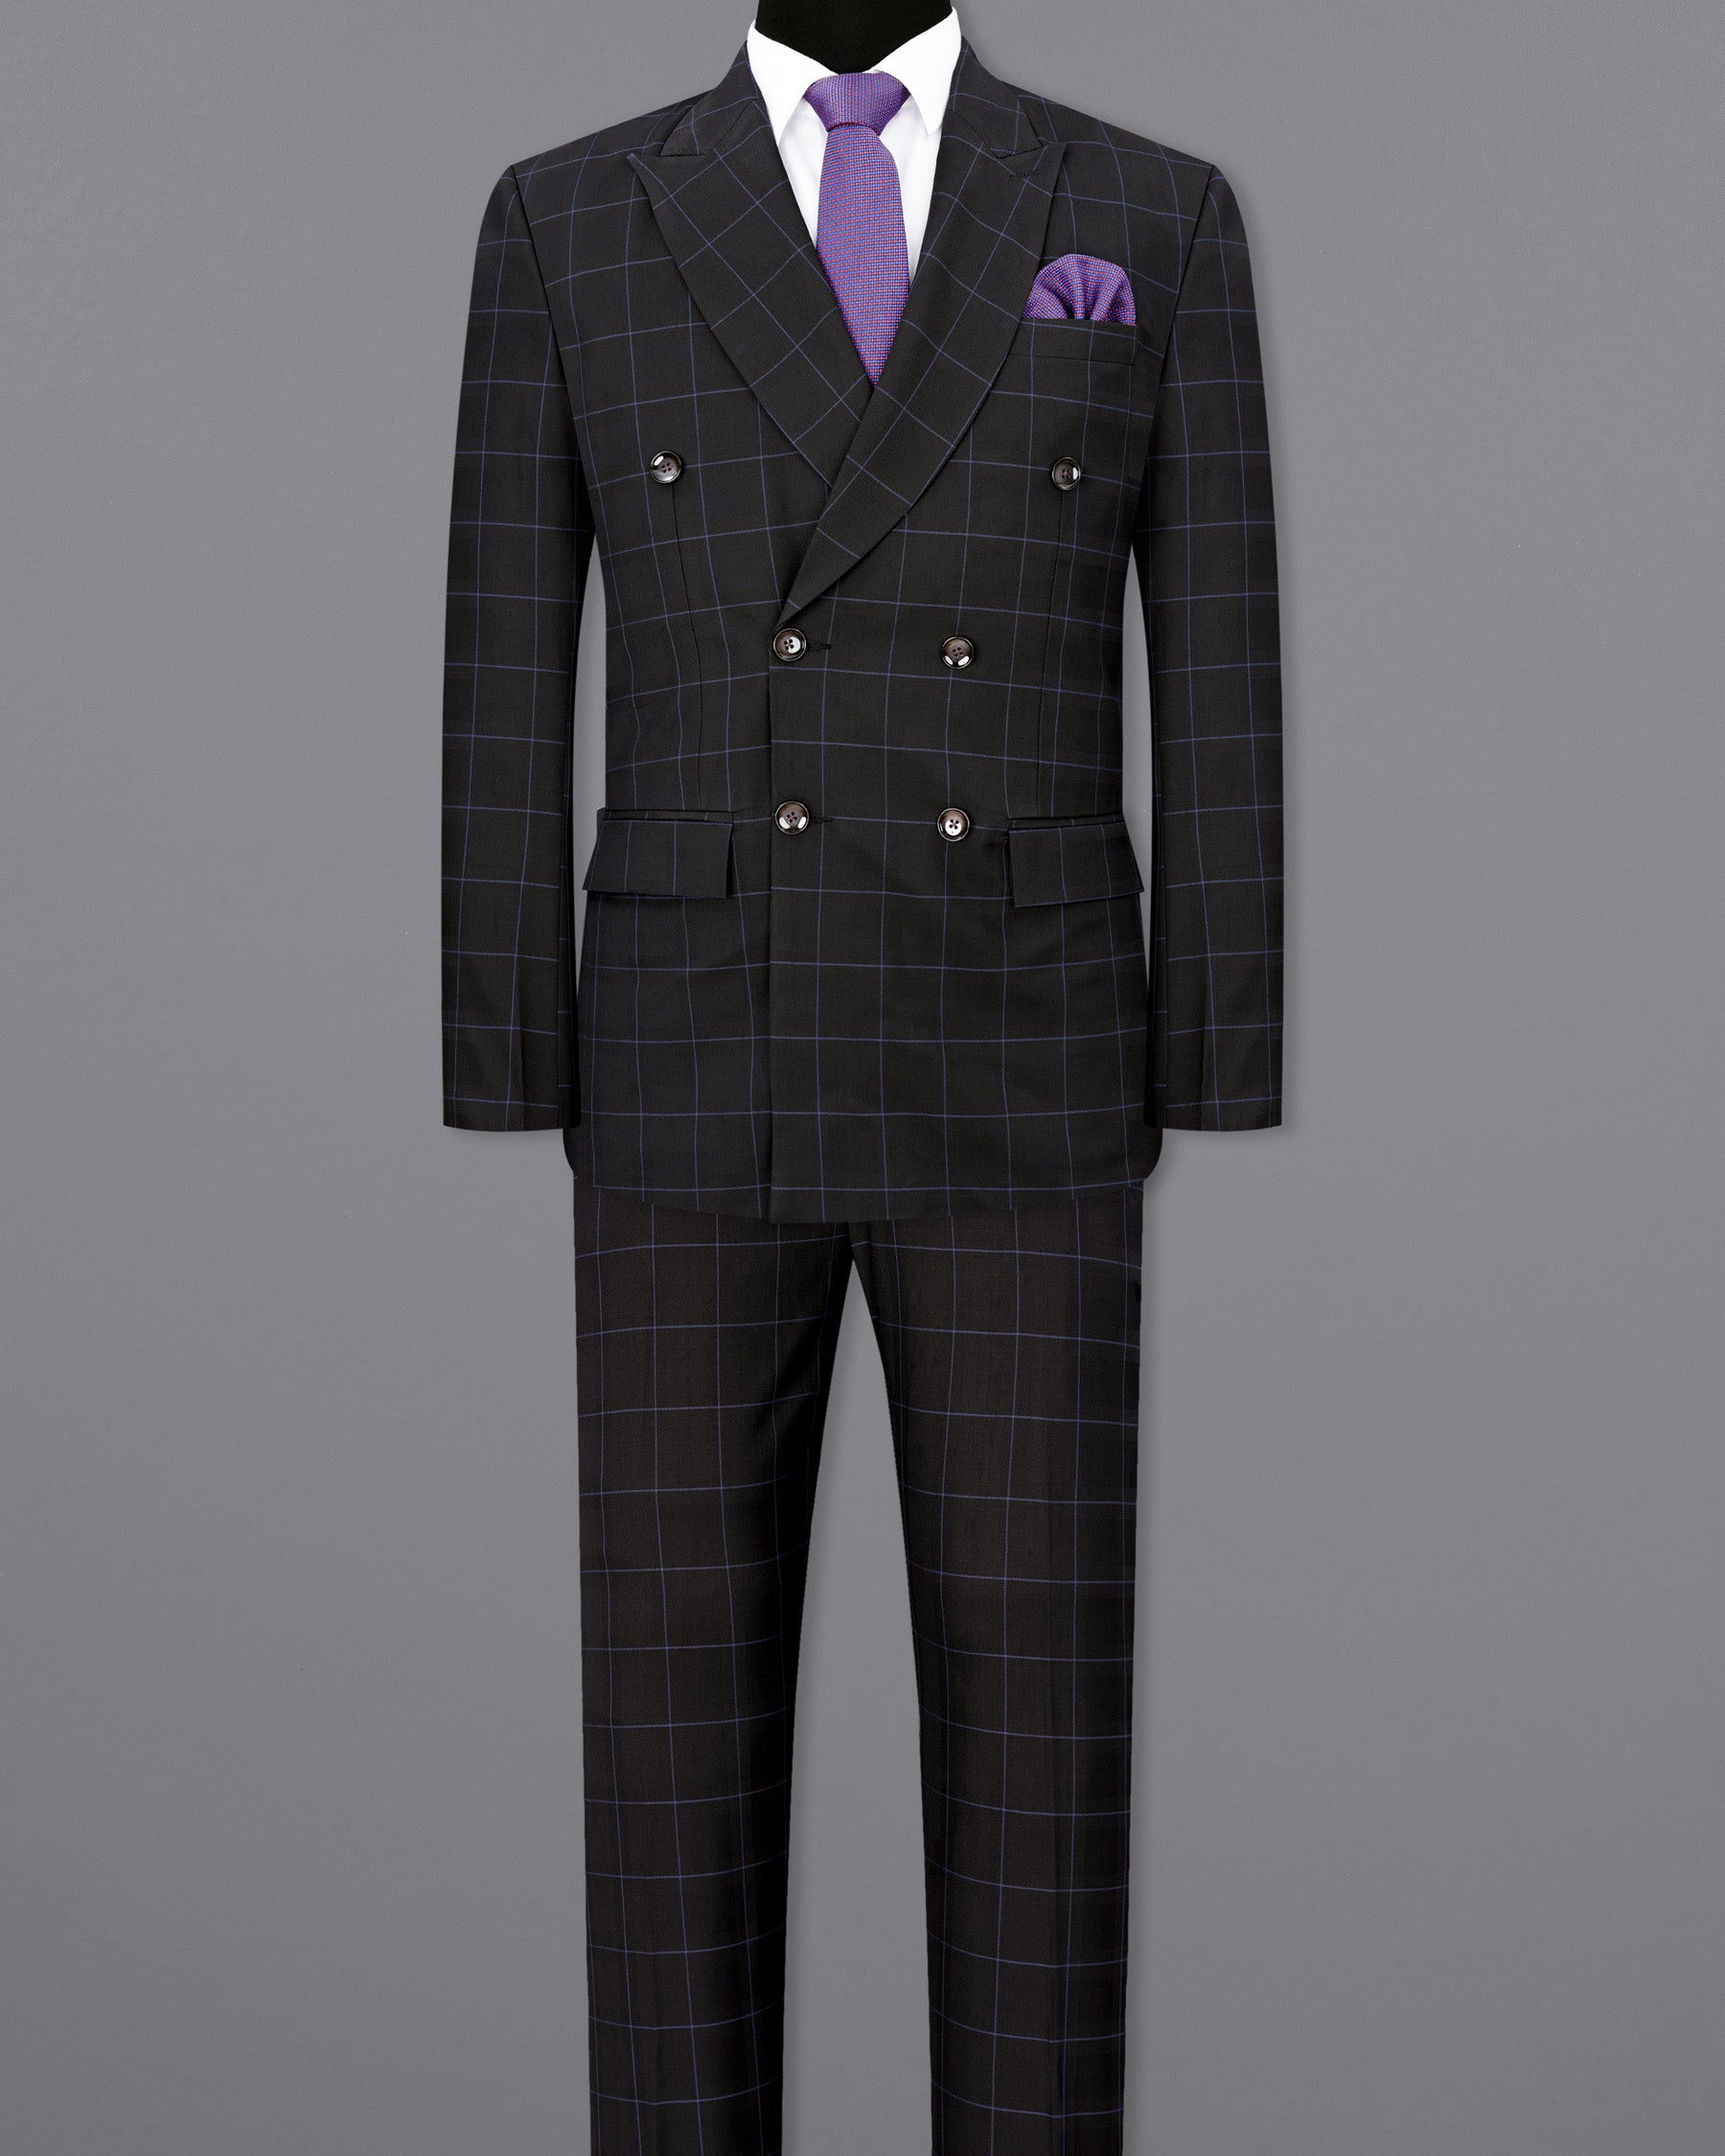 Thunder Windowpane Double Breasted Suit ST1891-DB-36, ST1891-DB-38, ST1891-DB-40, ST1891-DB-42, ST1891-DB-44, ST1891-DB-46, ST1891-DB-48, ST1891-DB-50, ST1891-DB-52, ST1891-DB-54, ST1891-DB-56, ST1891-DB-58, ST1891-DB-60